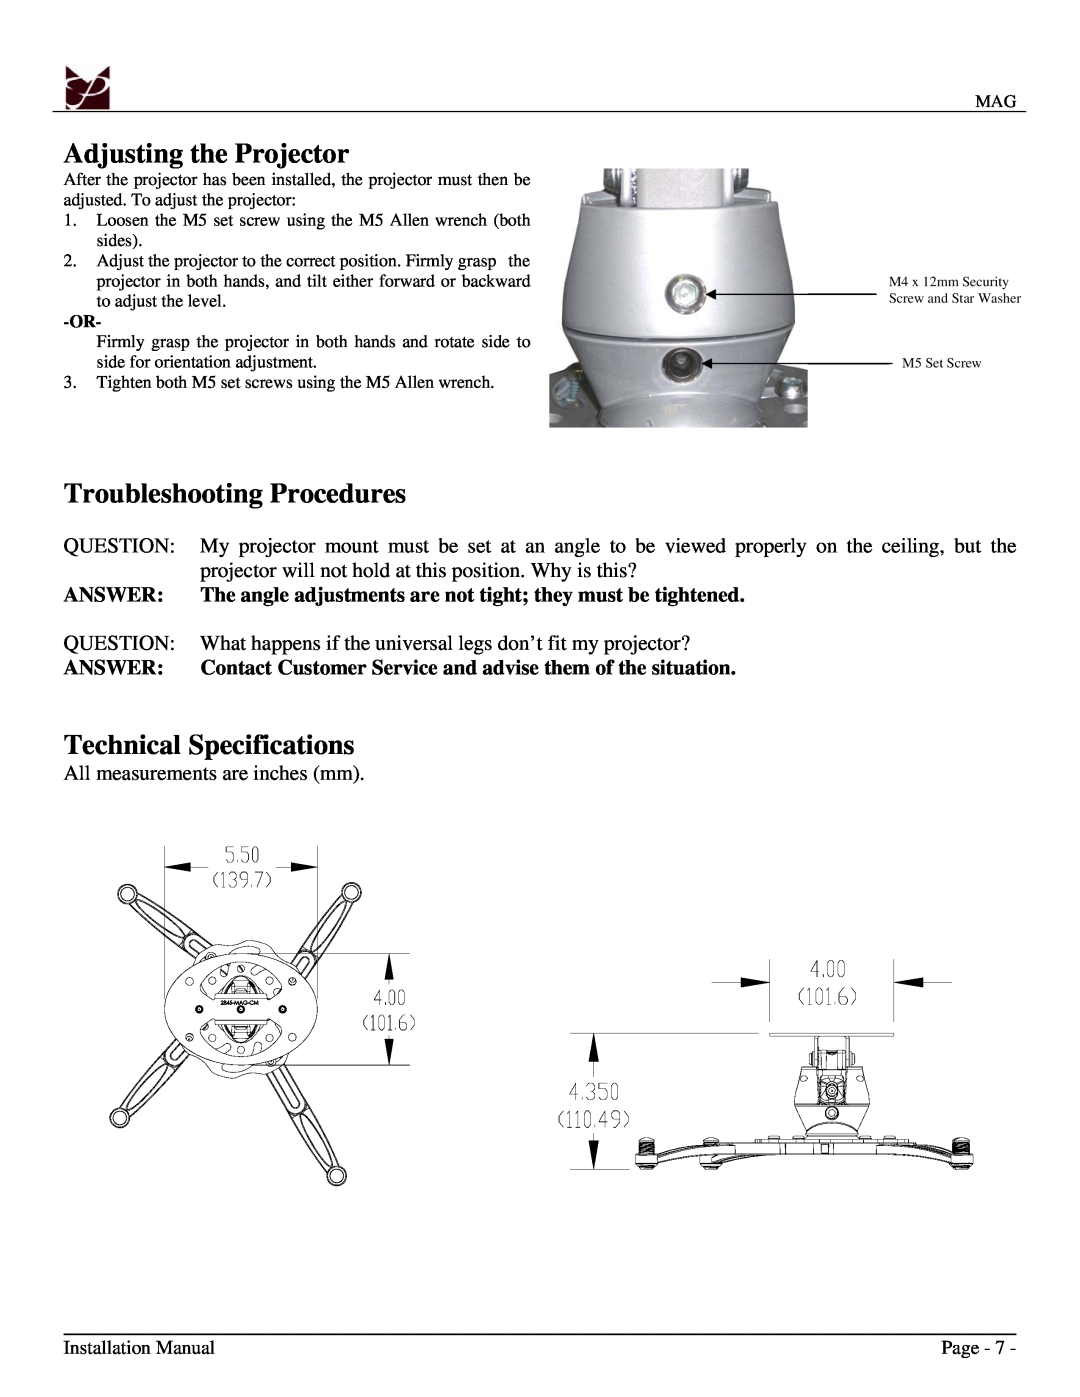 Premier Mounts MAG Adjusting the Projector, Troubleshooting Procedures, Technical Specifications, Answer, Page 